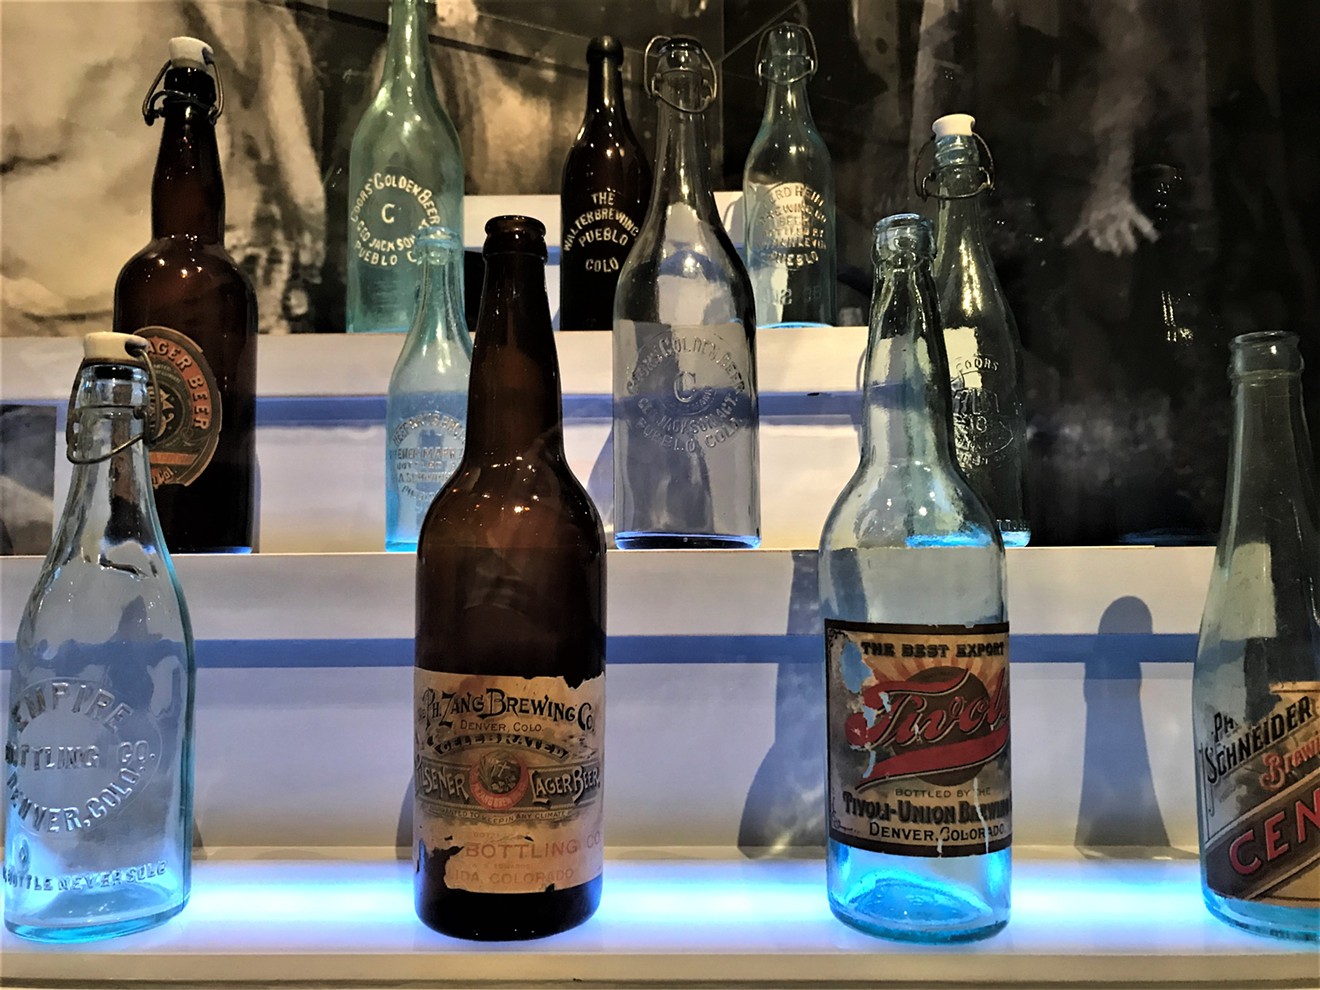 A selection of old bottles on display at History Colorado's Beer Here!